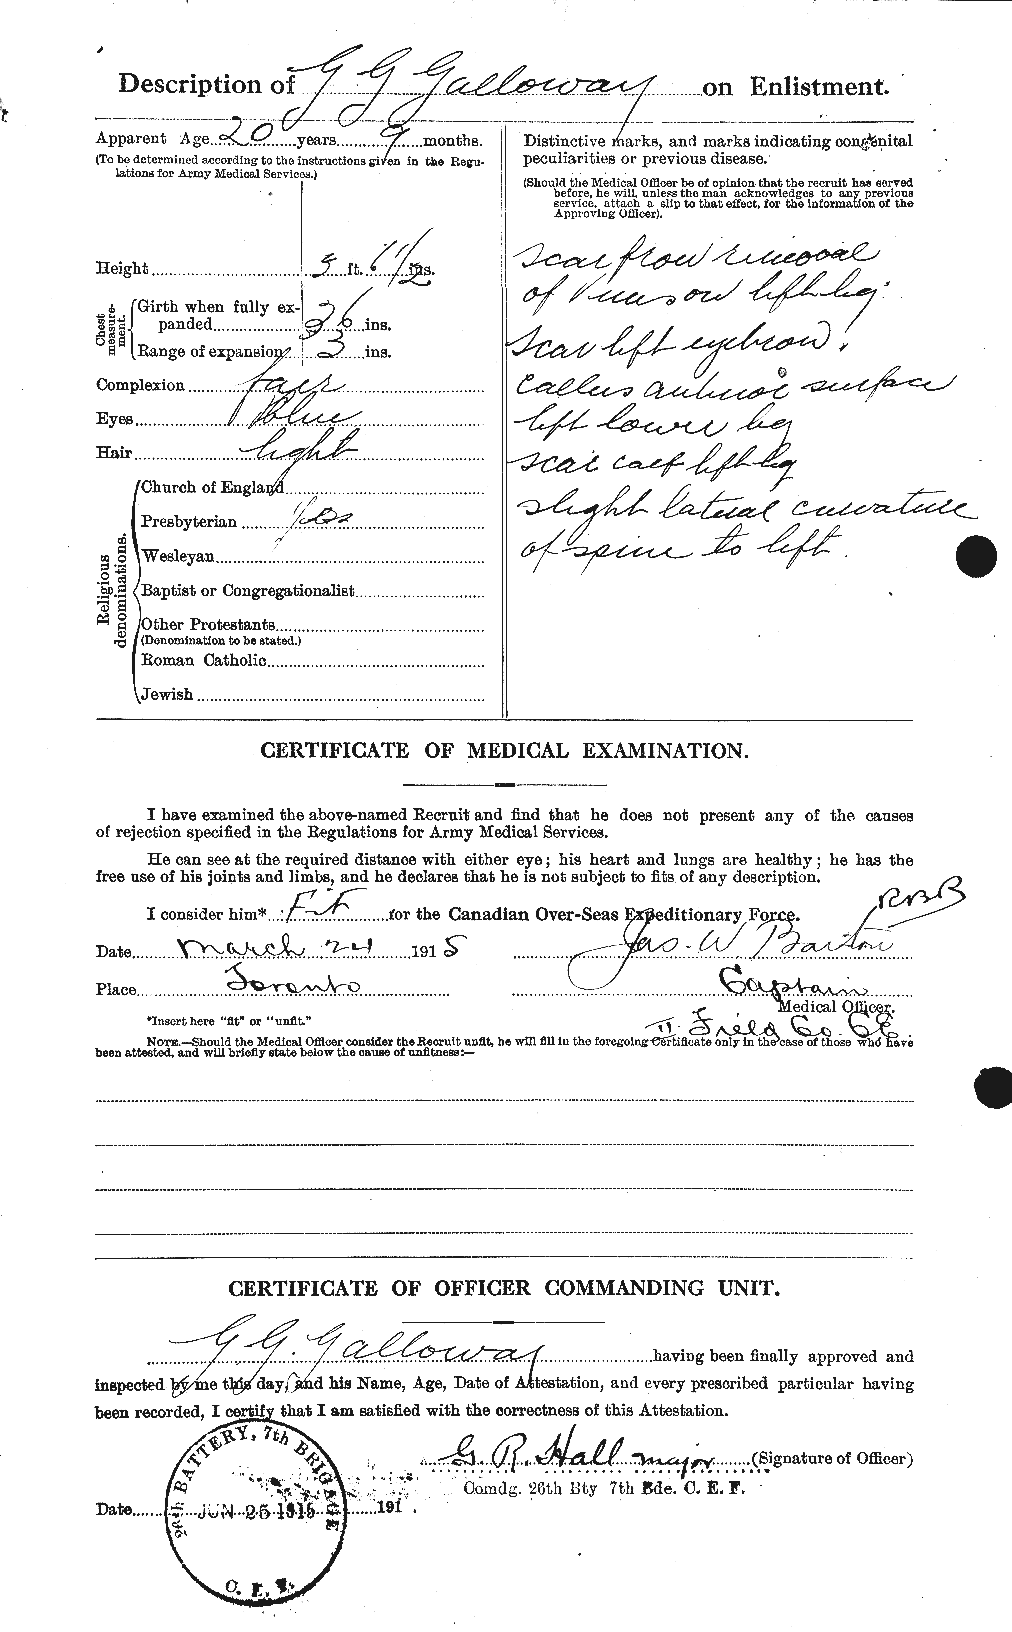 Personnel Records of the First World War - CEF 338773b